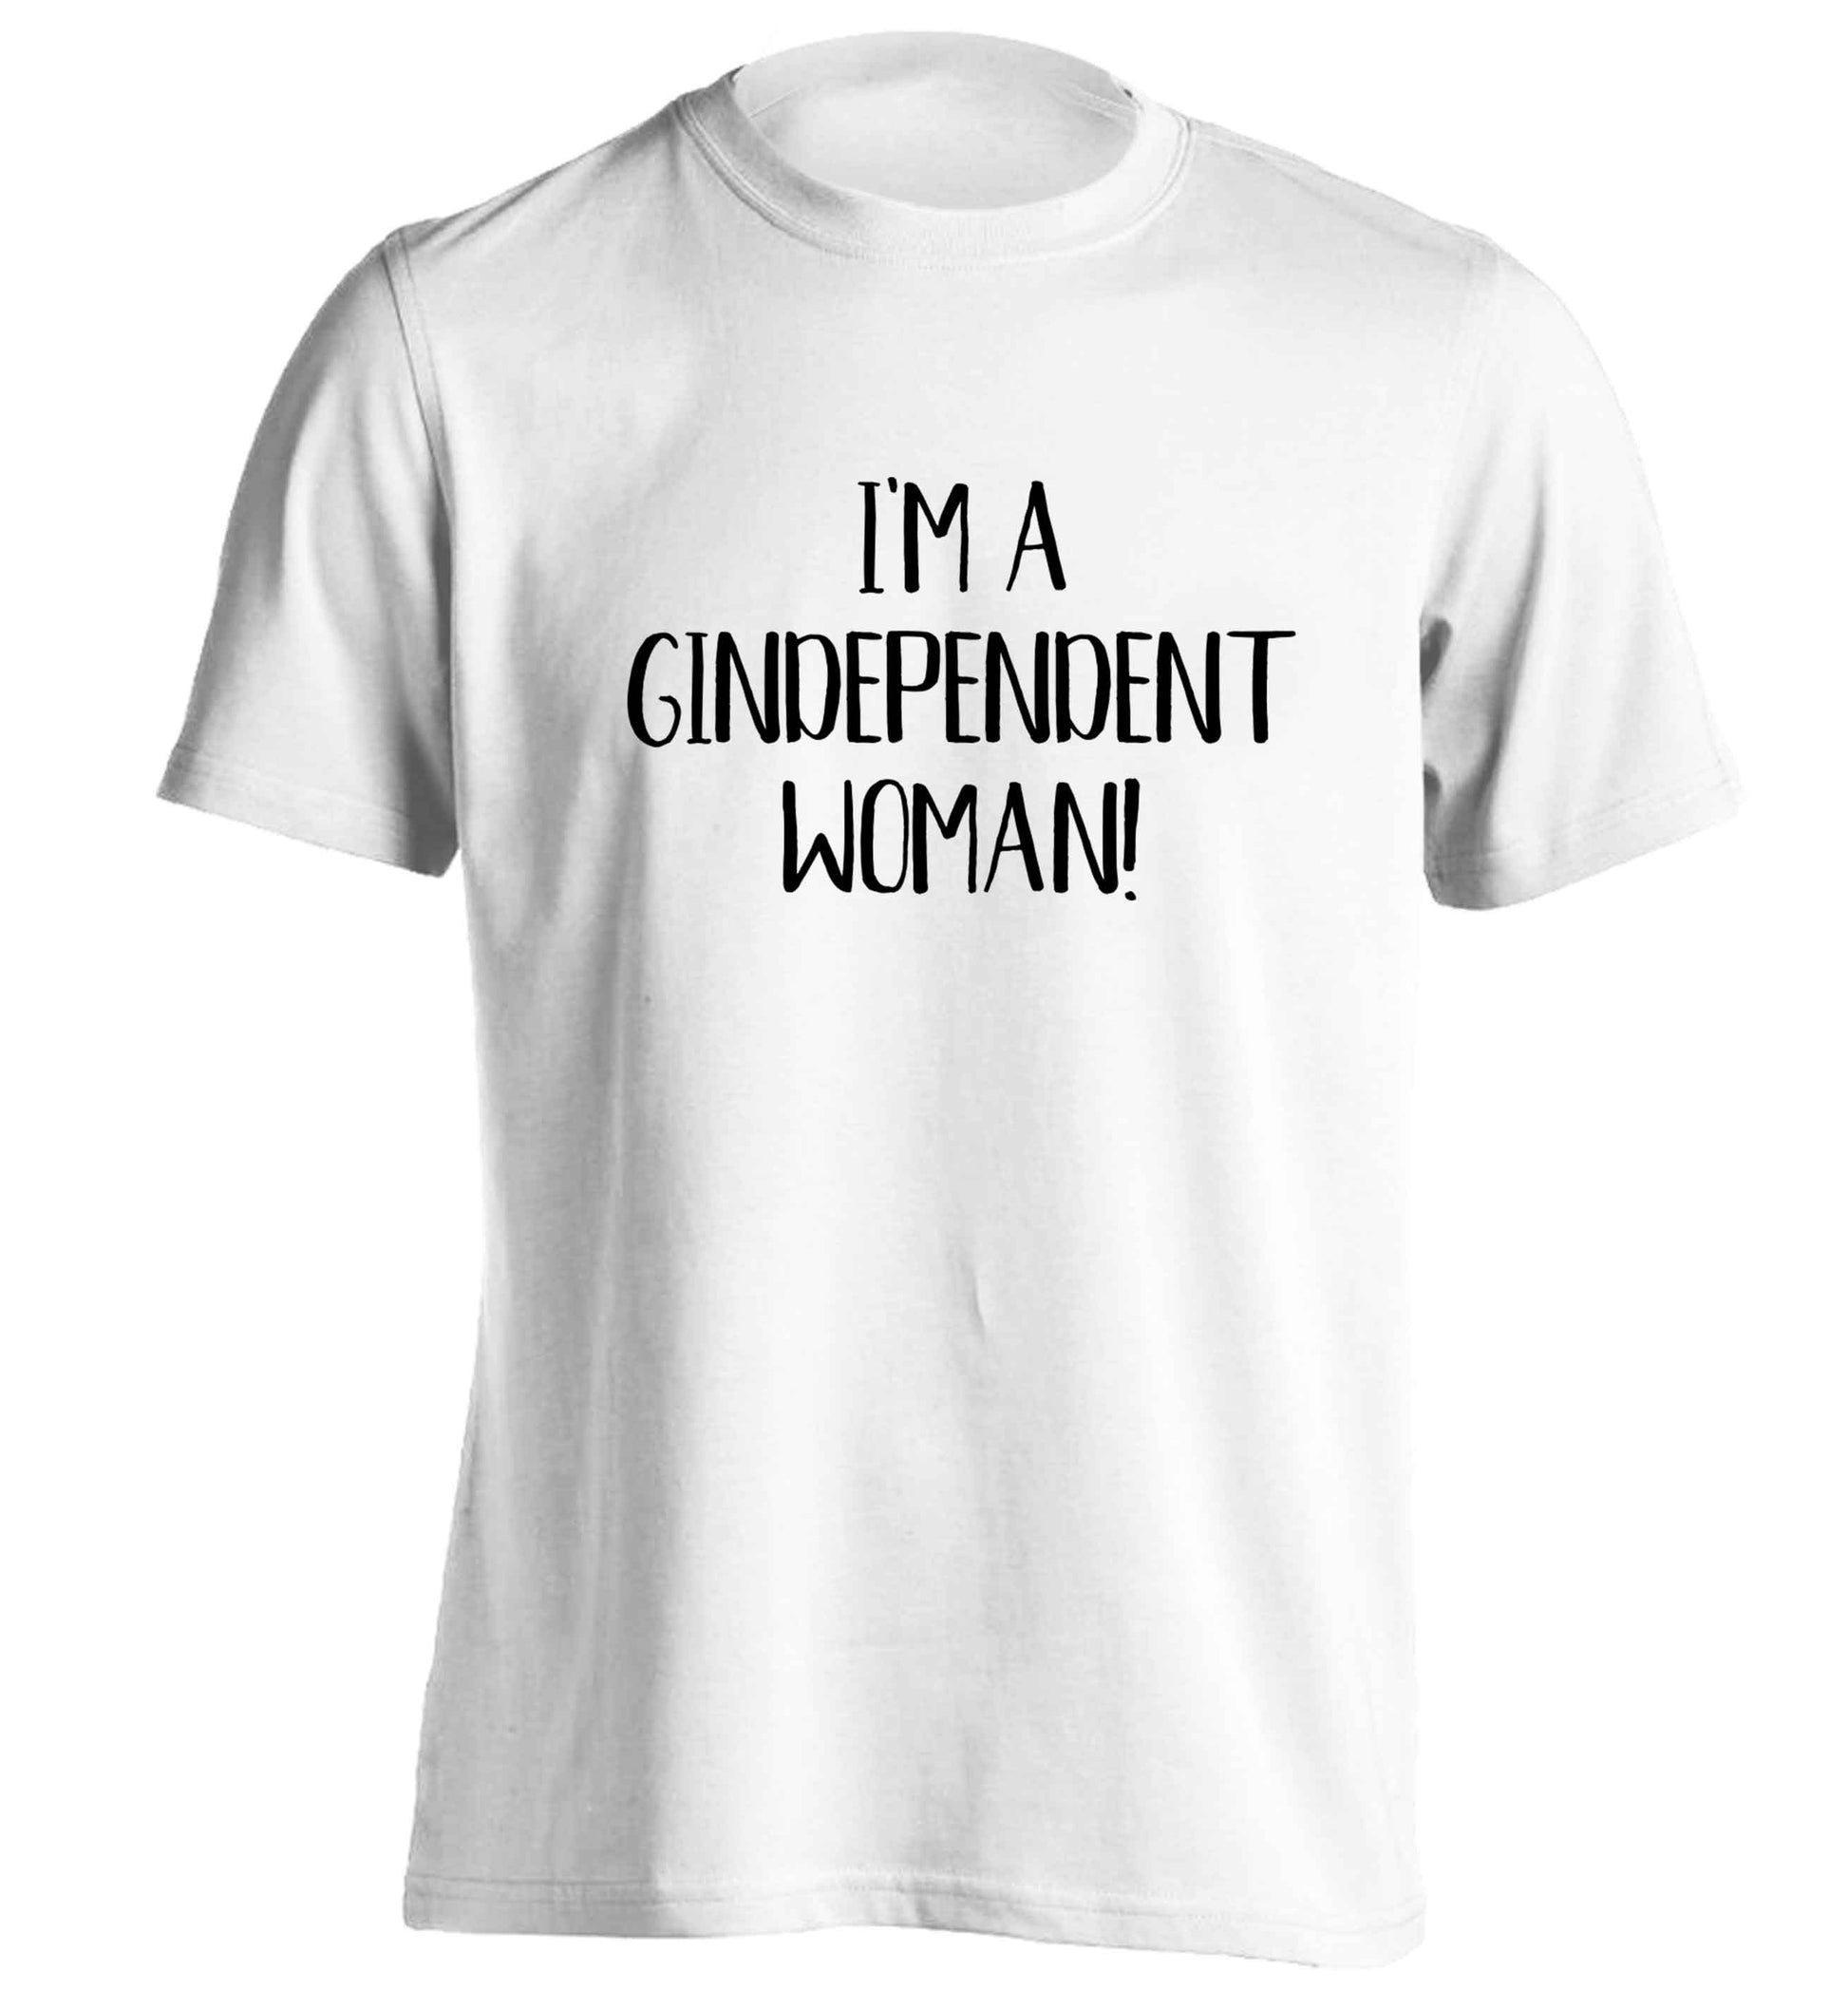 I'm a gindependent woman adults unisex white Tshirt 2XL